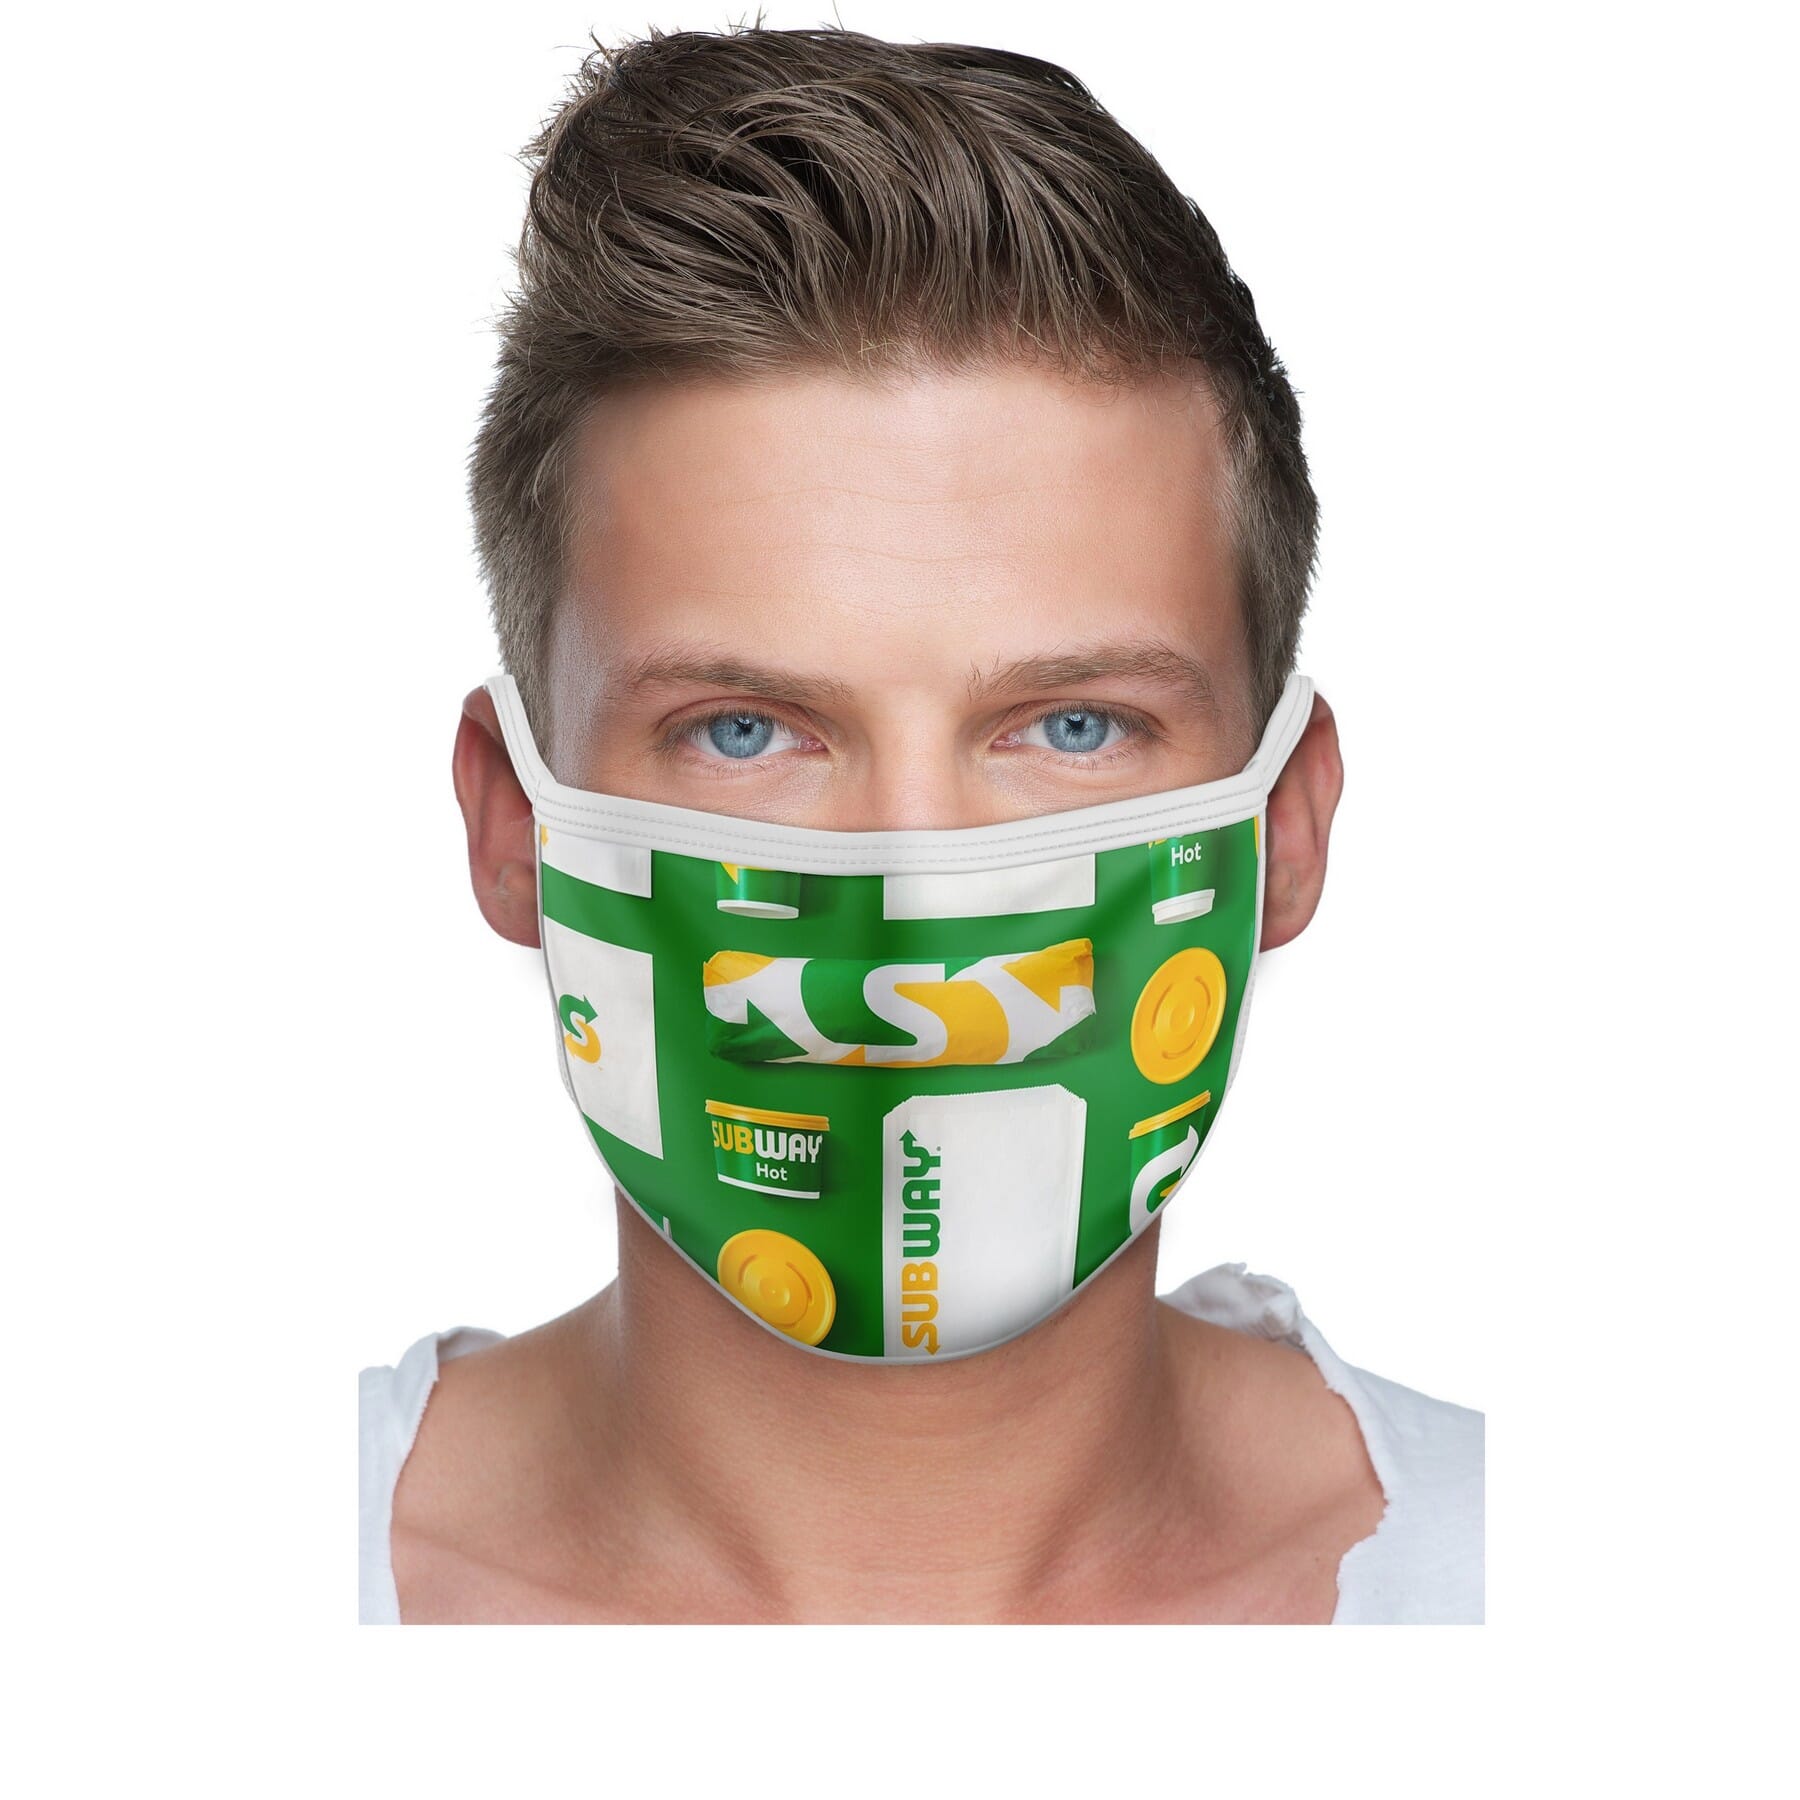 Fully customized 4-ply face mask